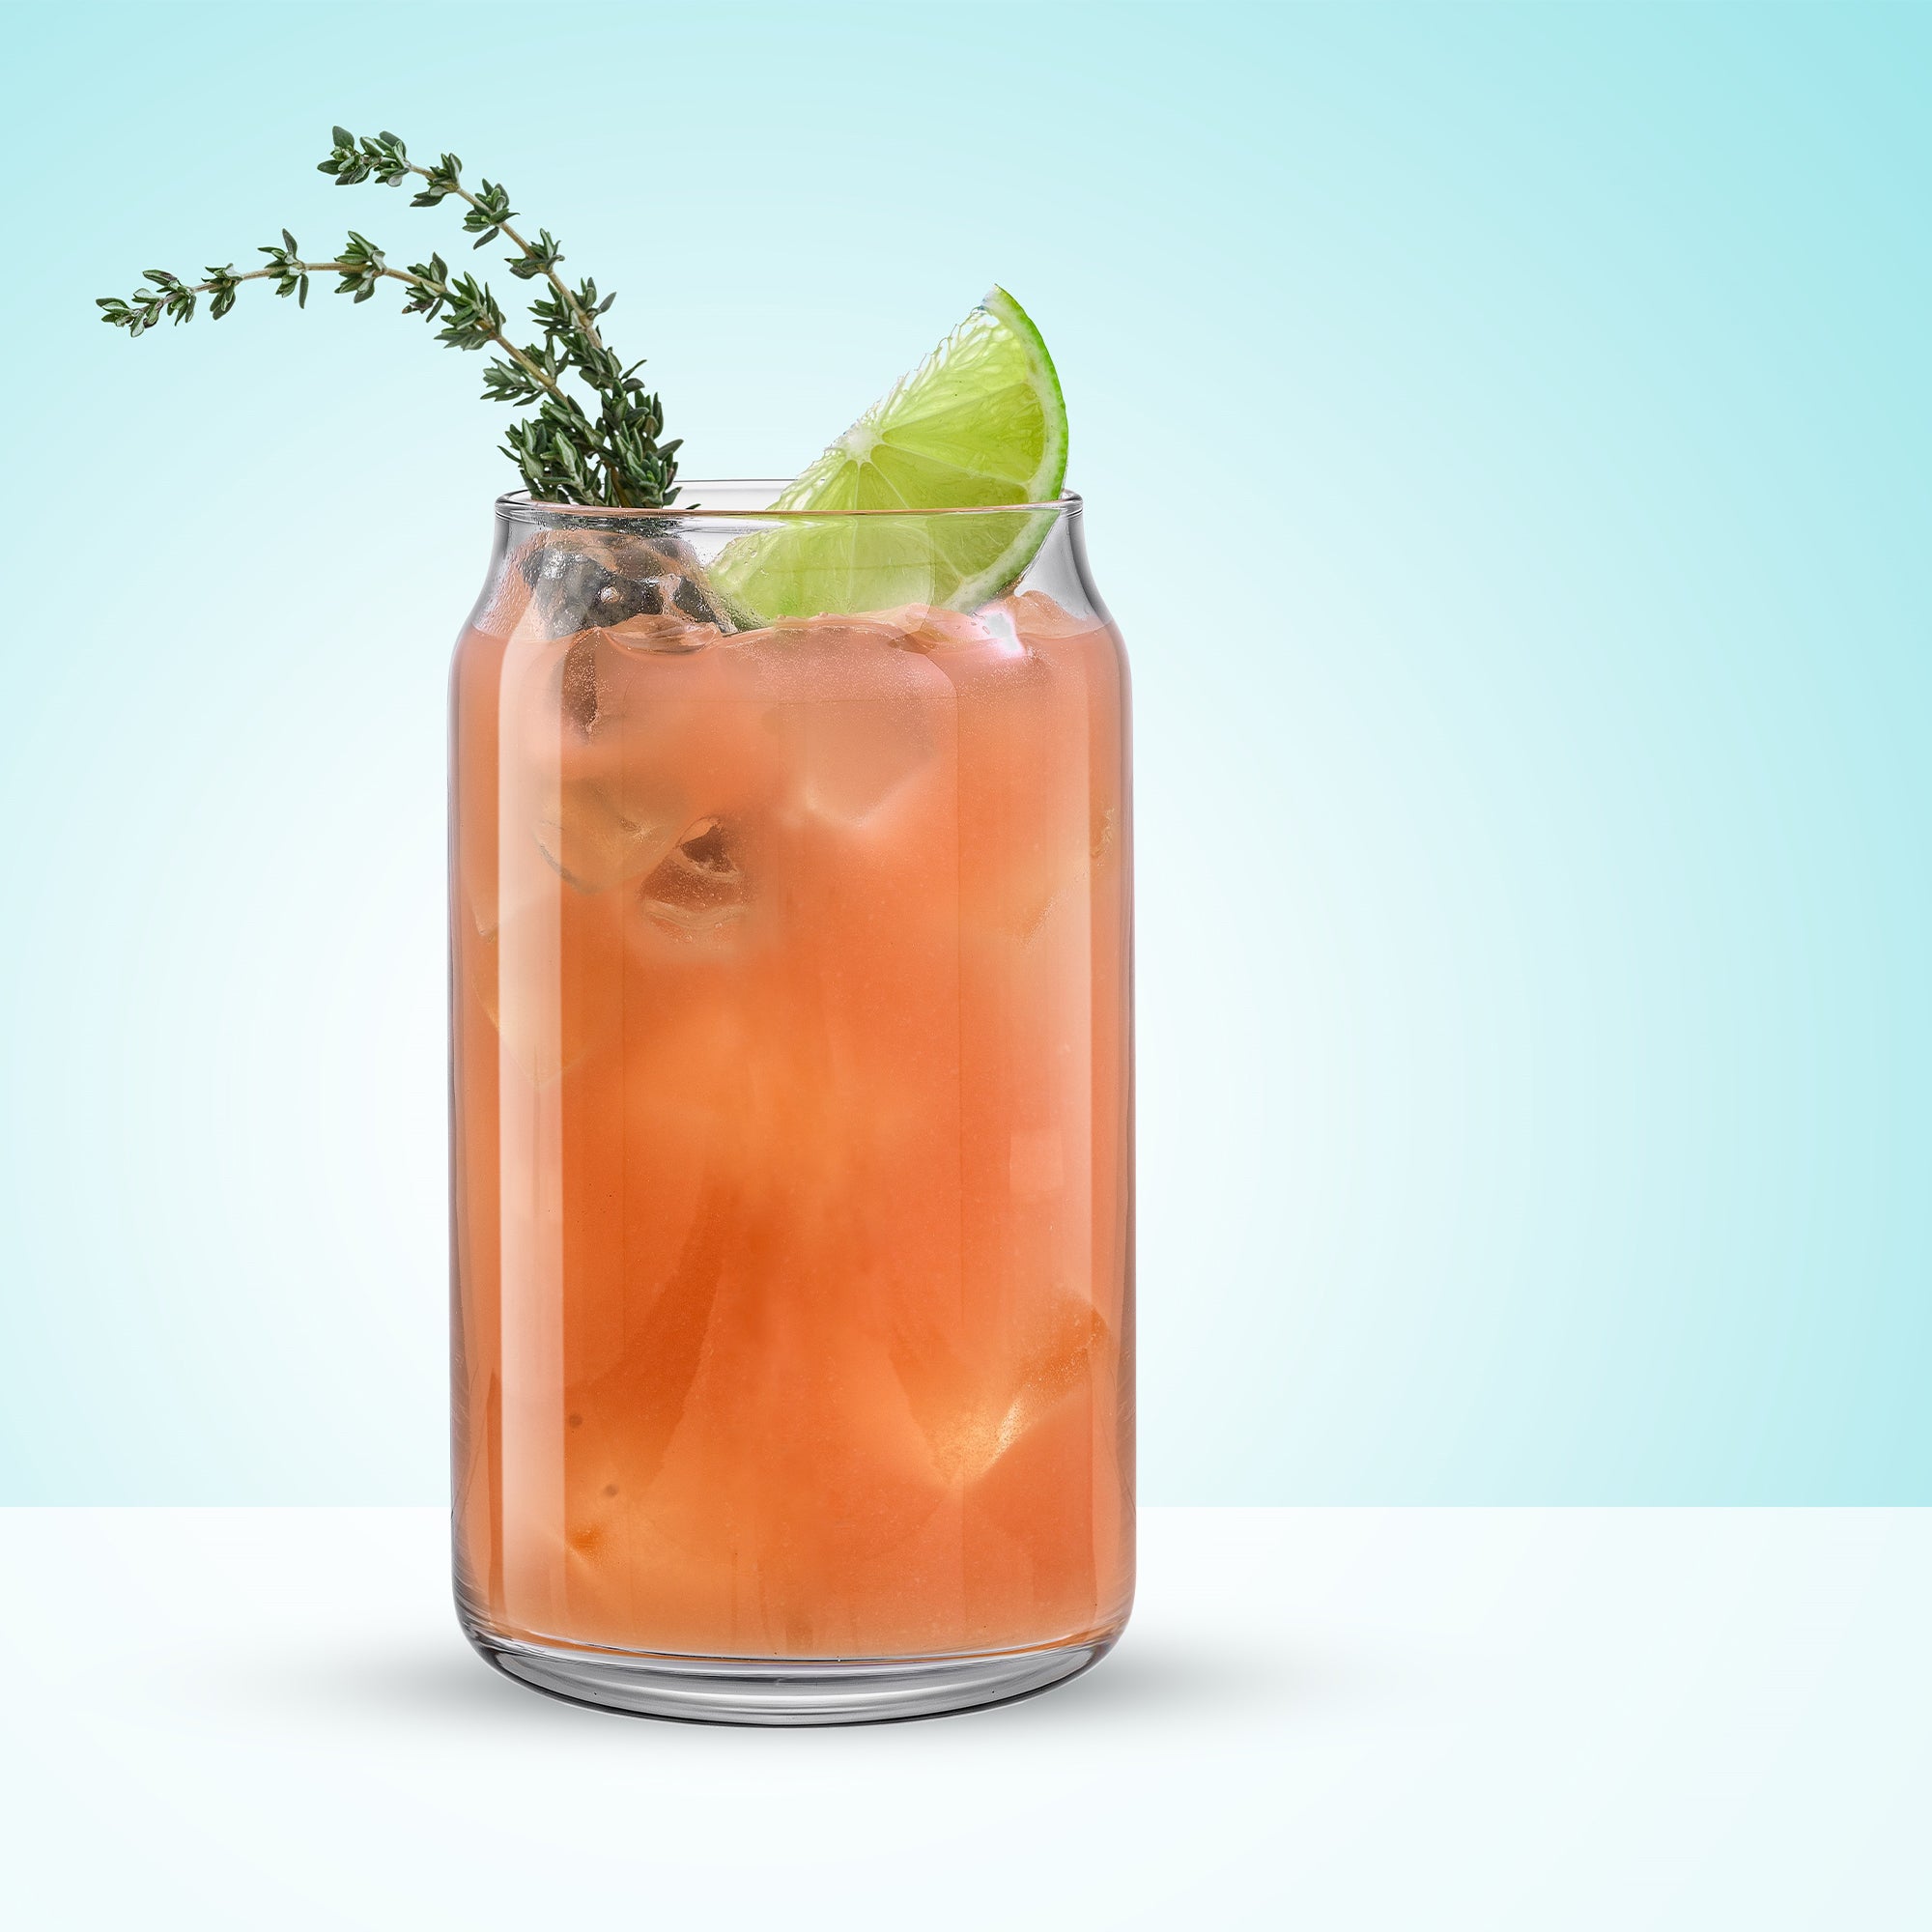 A glass of orange drink with a sprig of thyme, served in a Classic Can Shape Tumbler Drinking Glass Cup by JoyJolt.